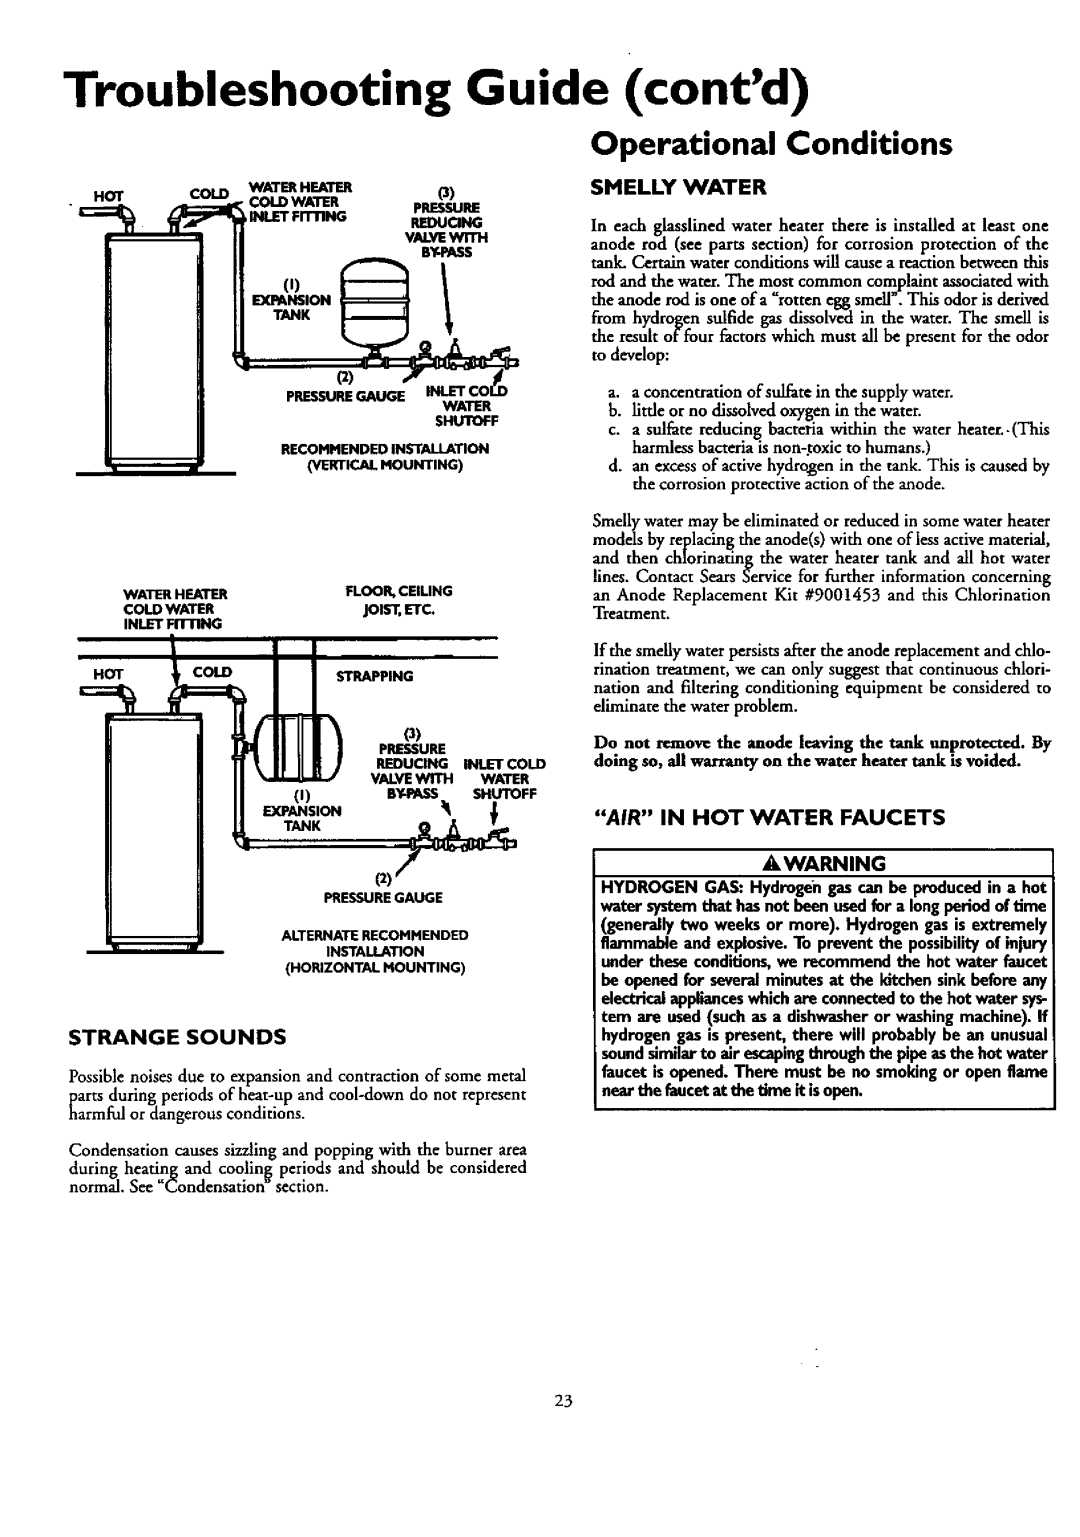 Kenmore 153.330401 owner manual Troubleshooting Guide contd, Operational Conditions, eliminate the water pmblem 